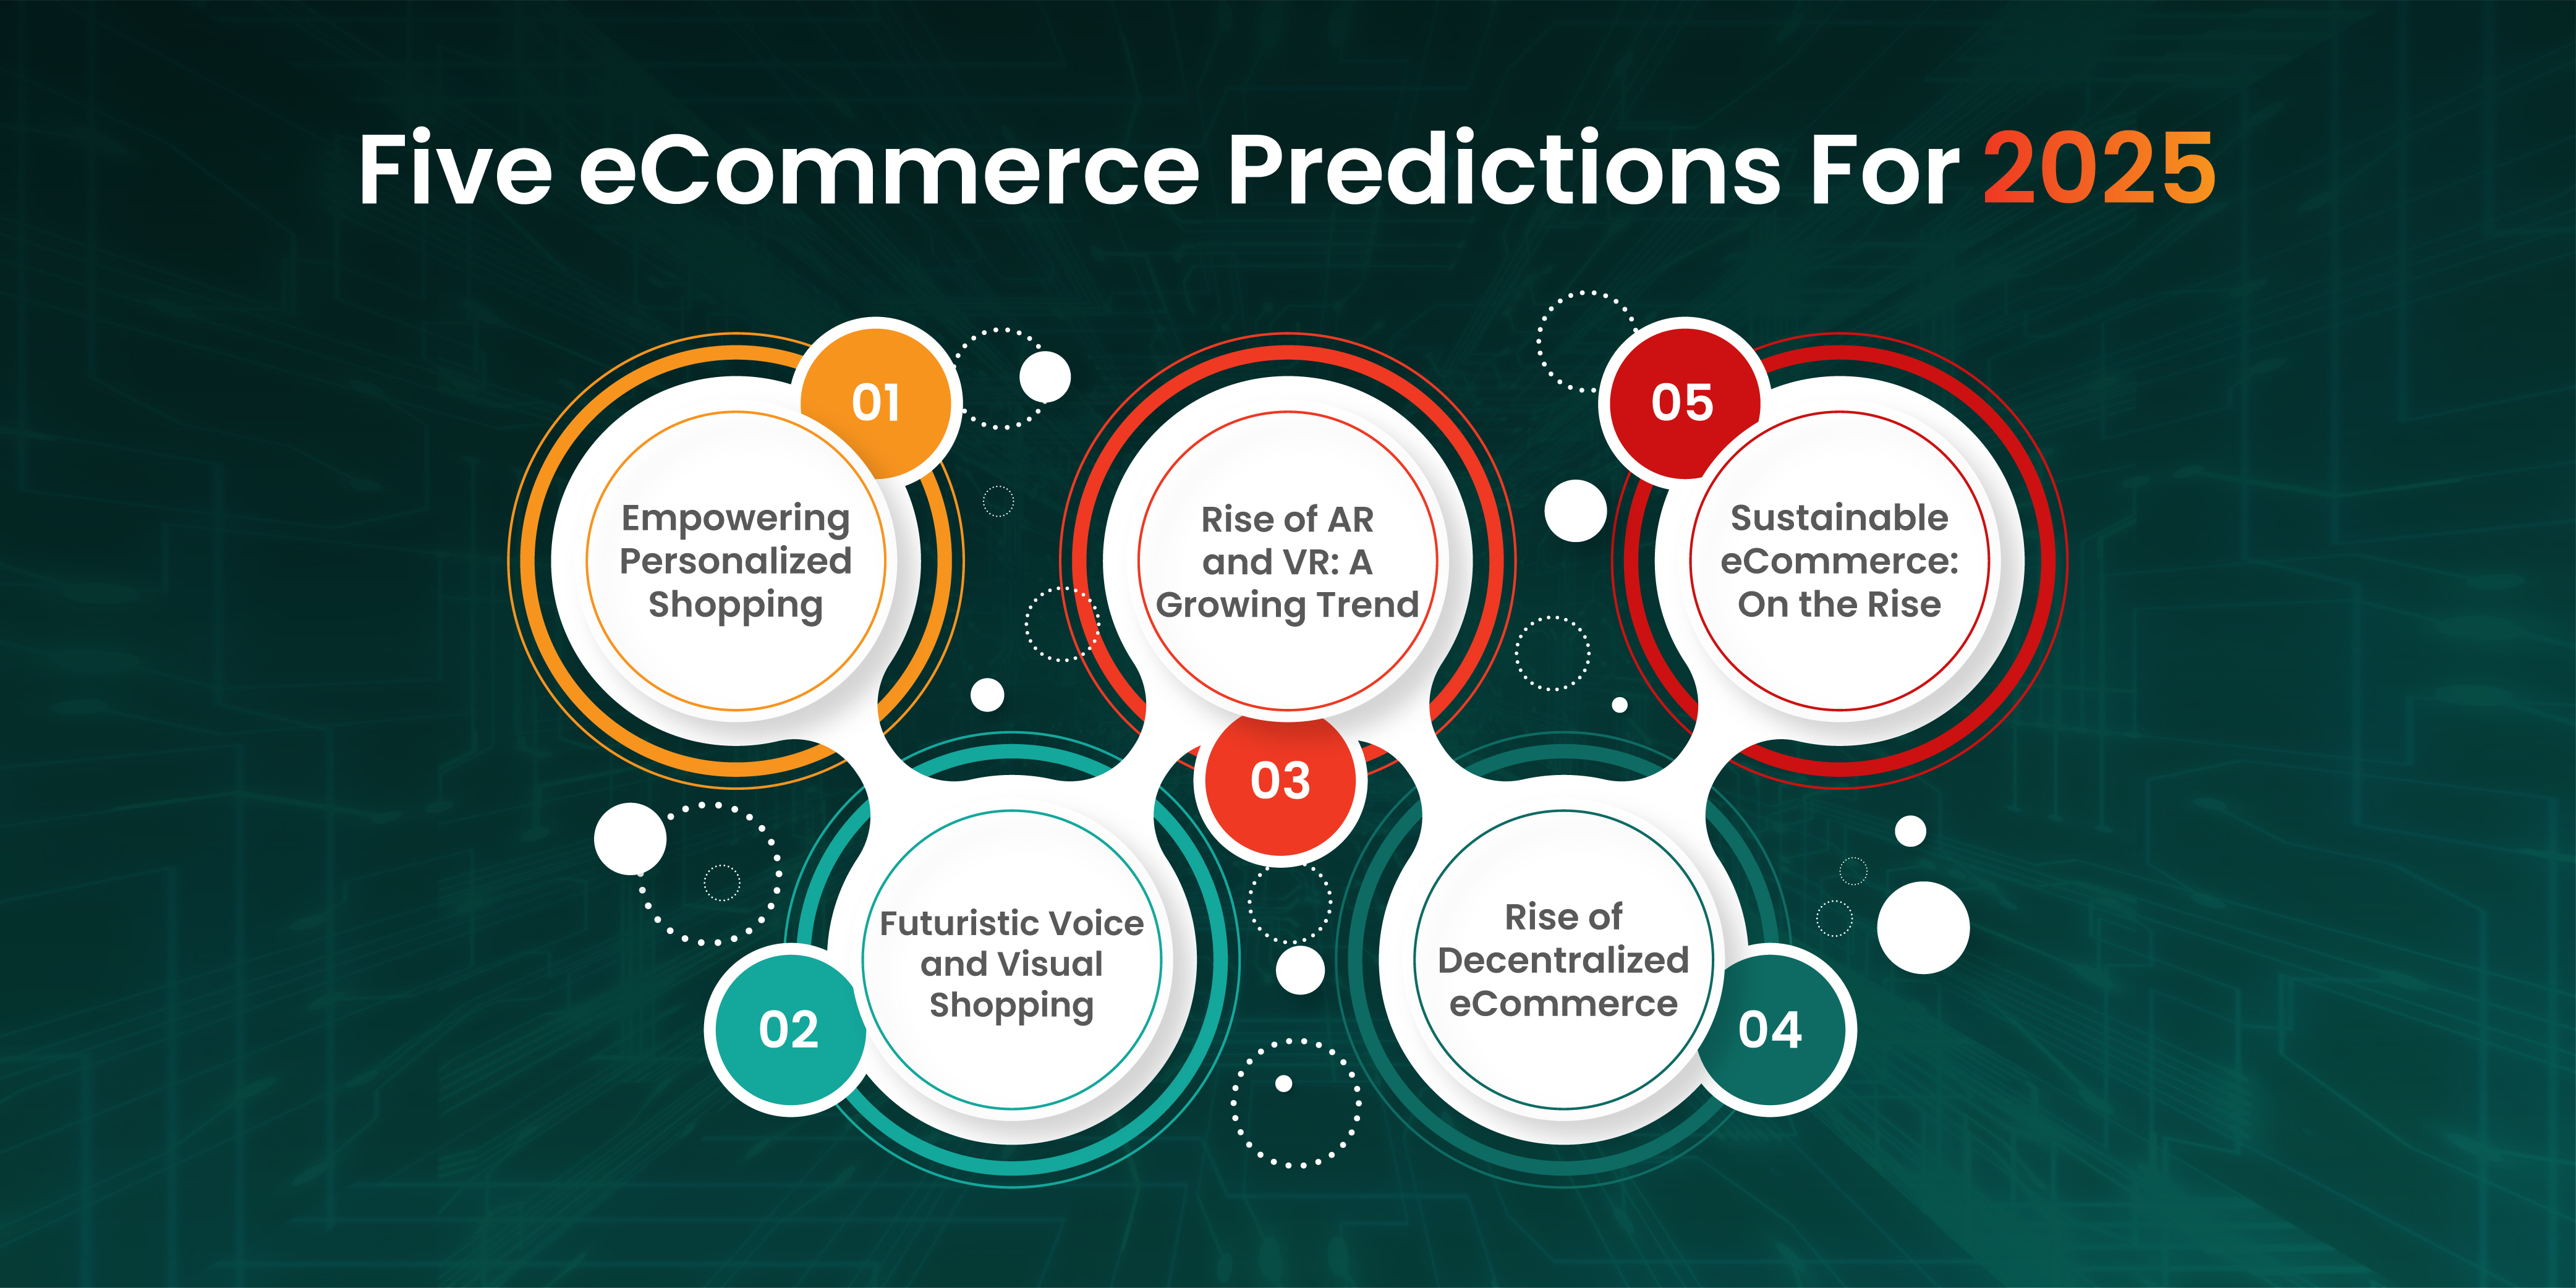 Five eCommerce Predictions For 2025